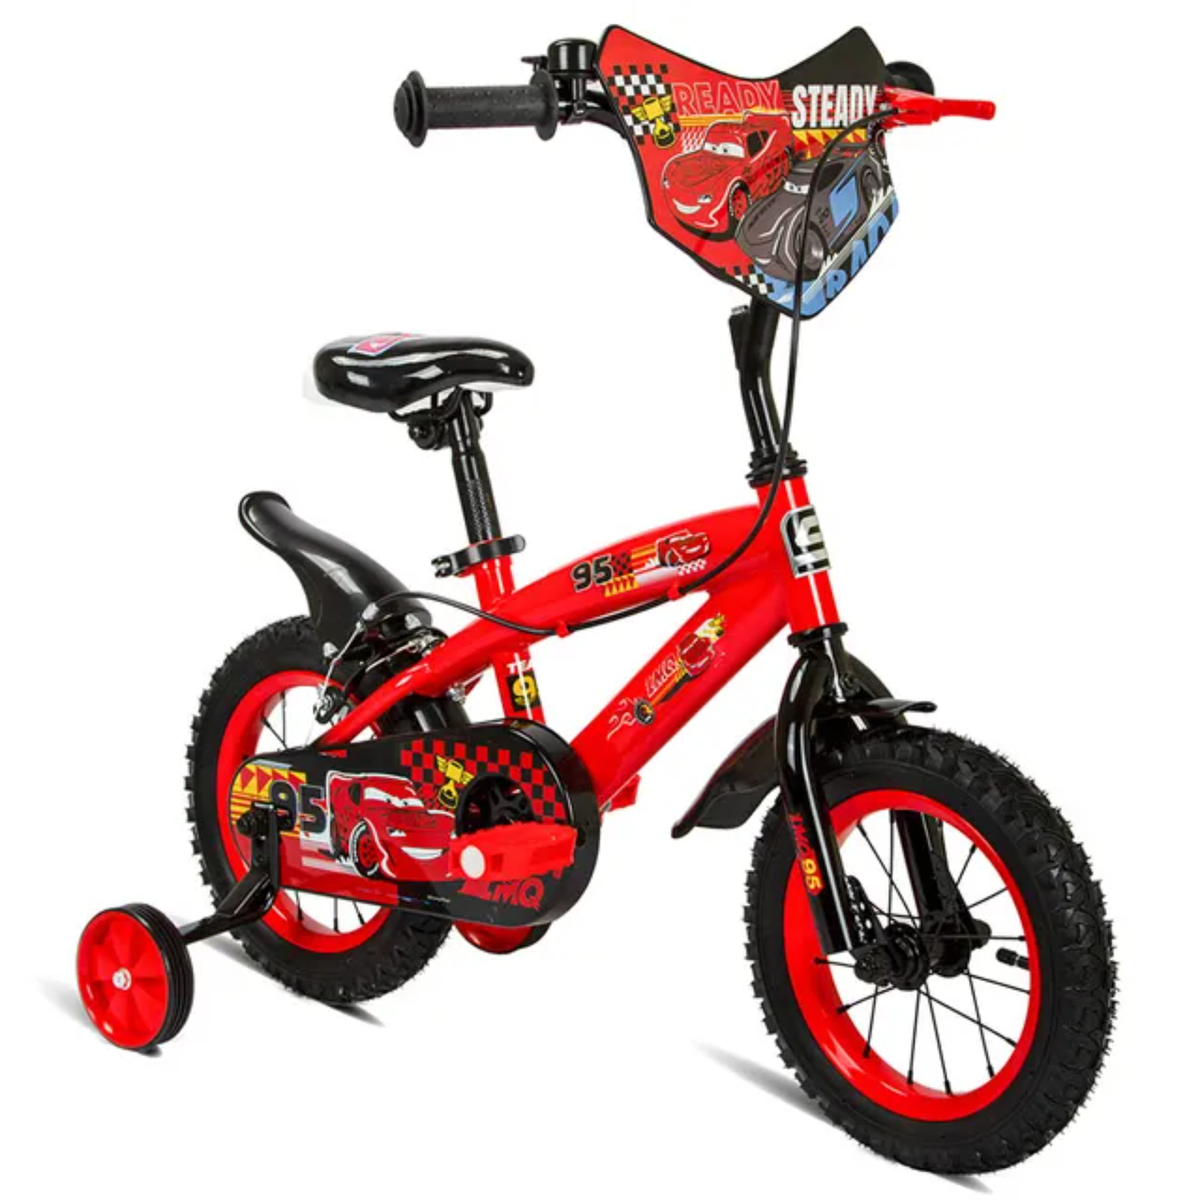 Spartan Disney Cars Bicycle - Red - 12-inch SP-3200